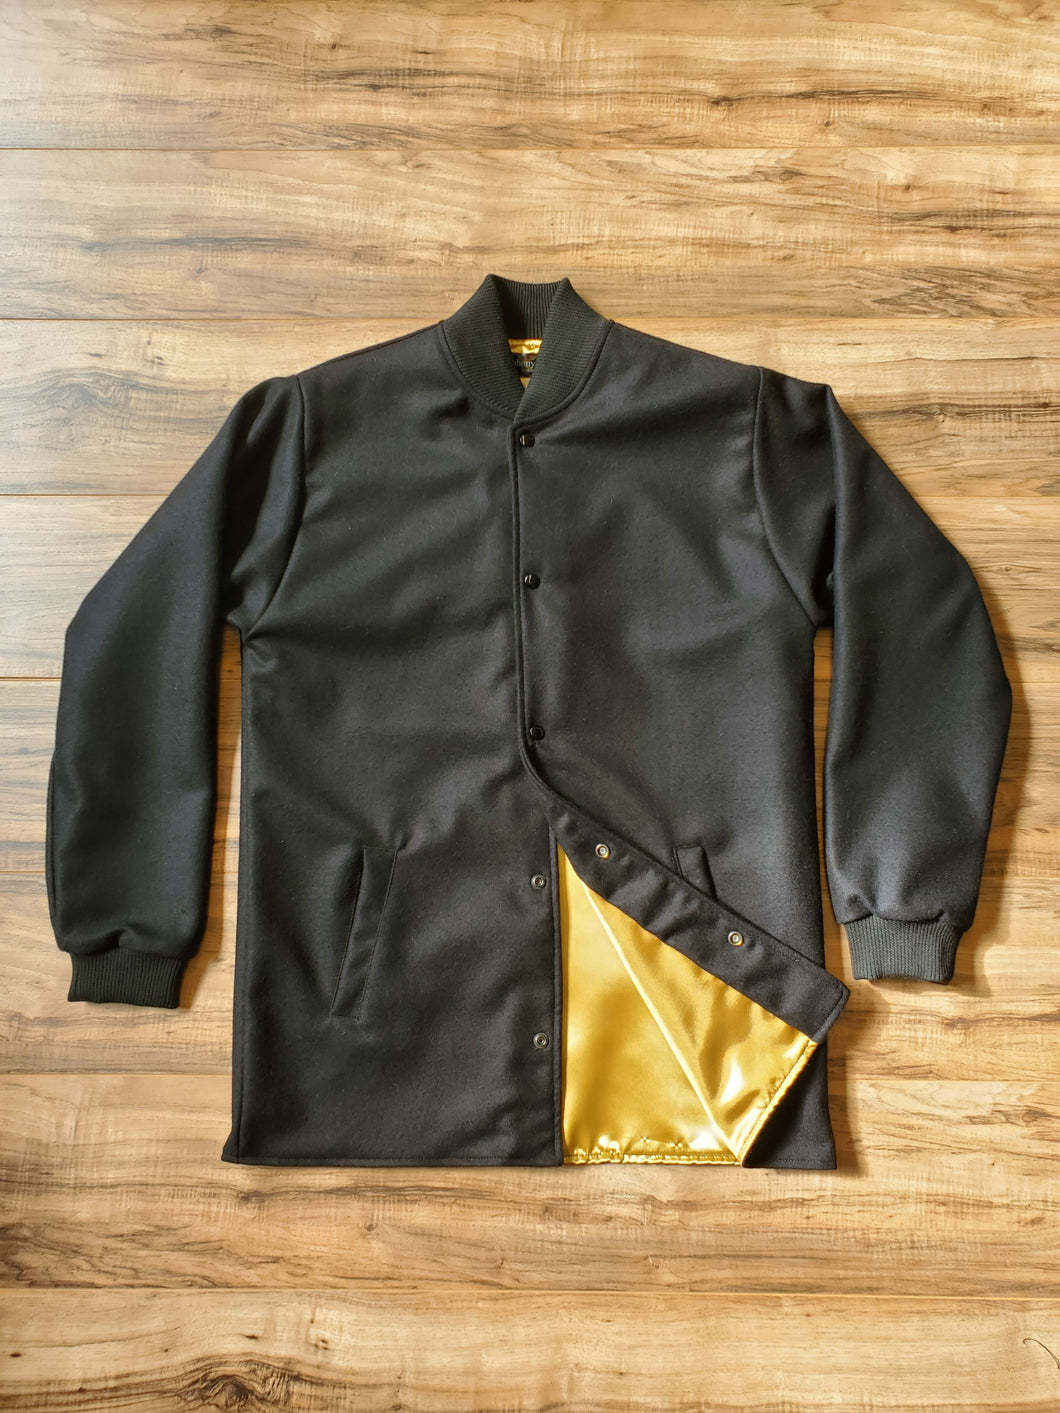 black and gold clicker - top seller